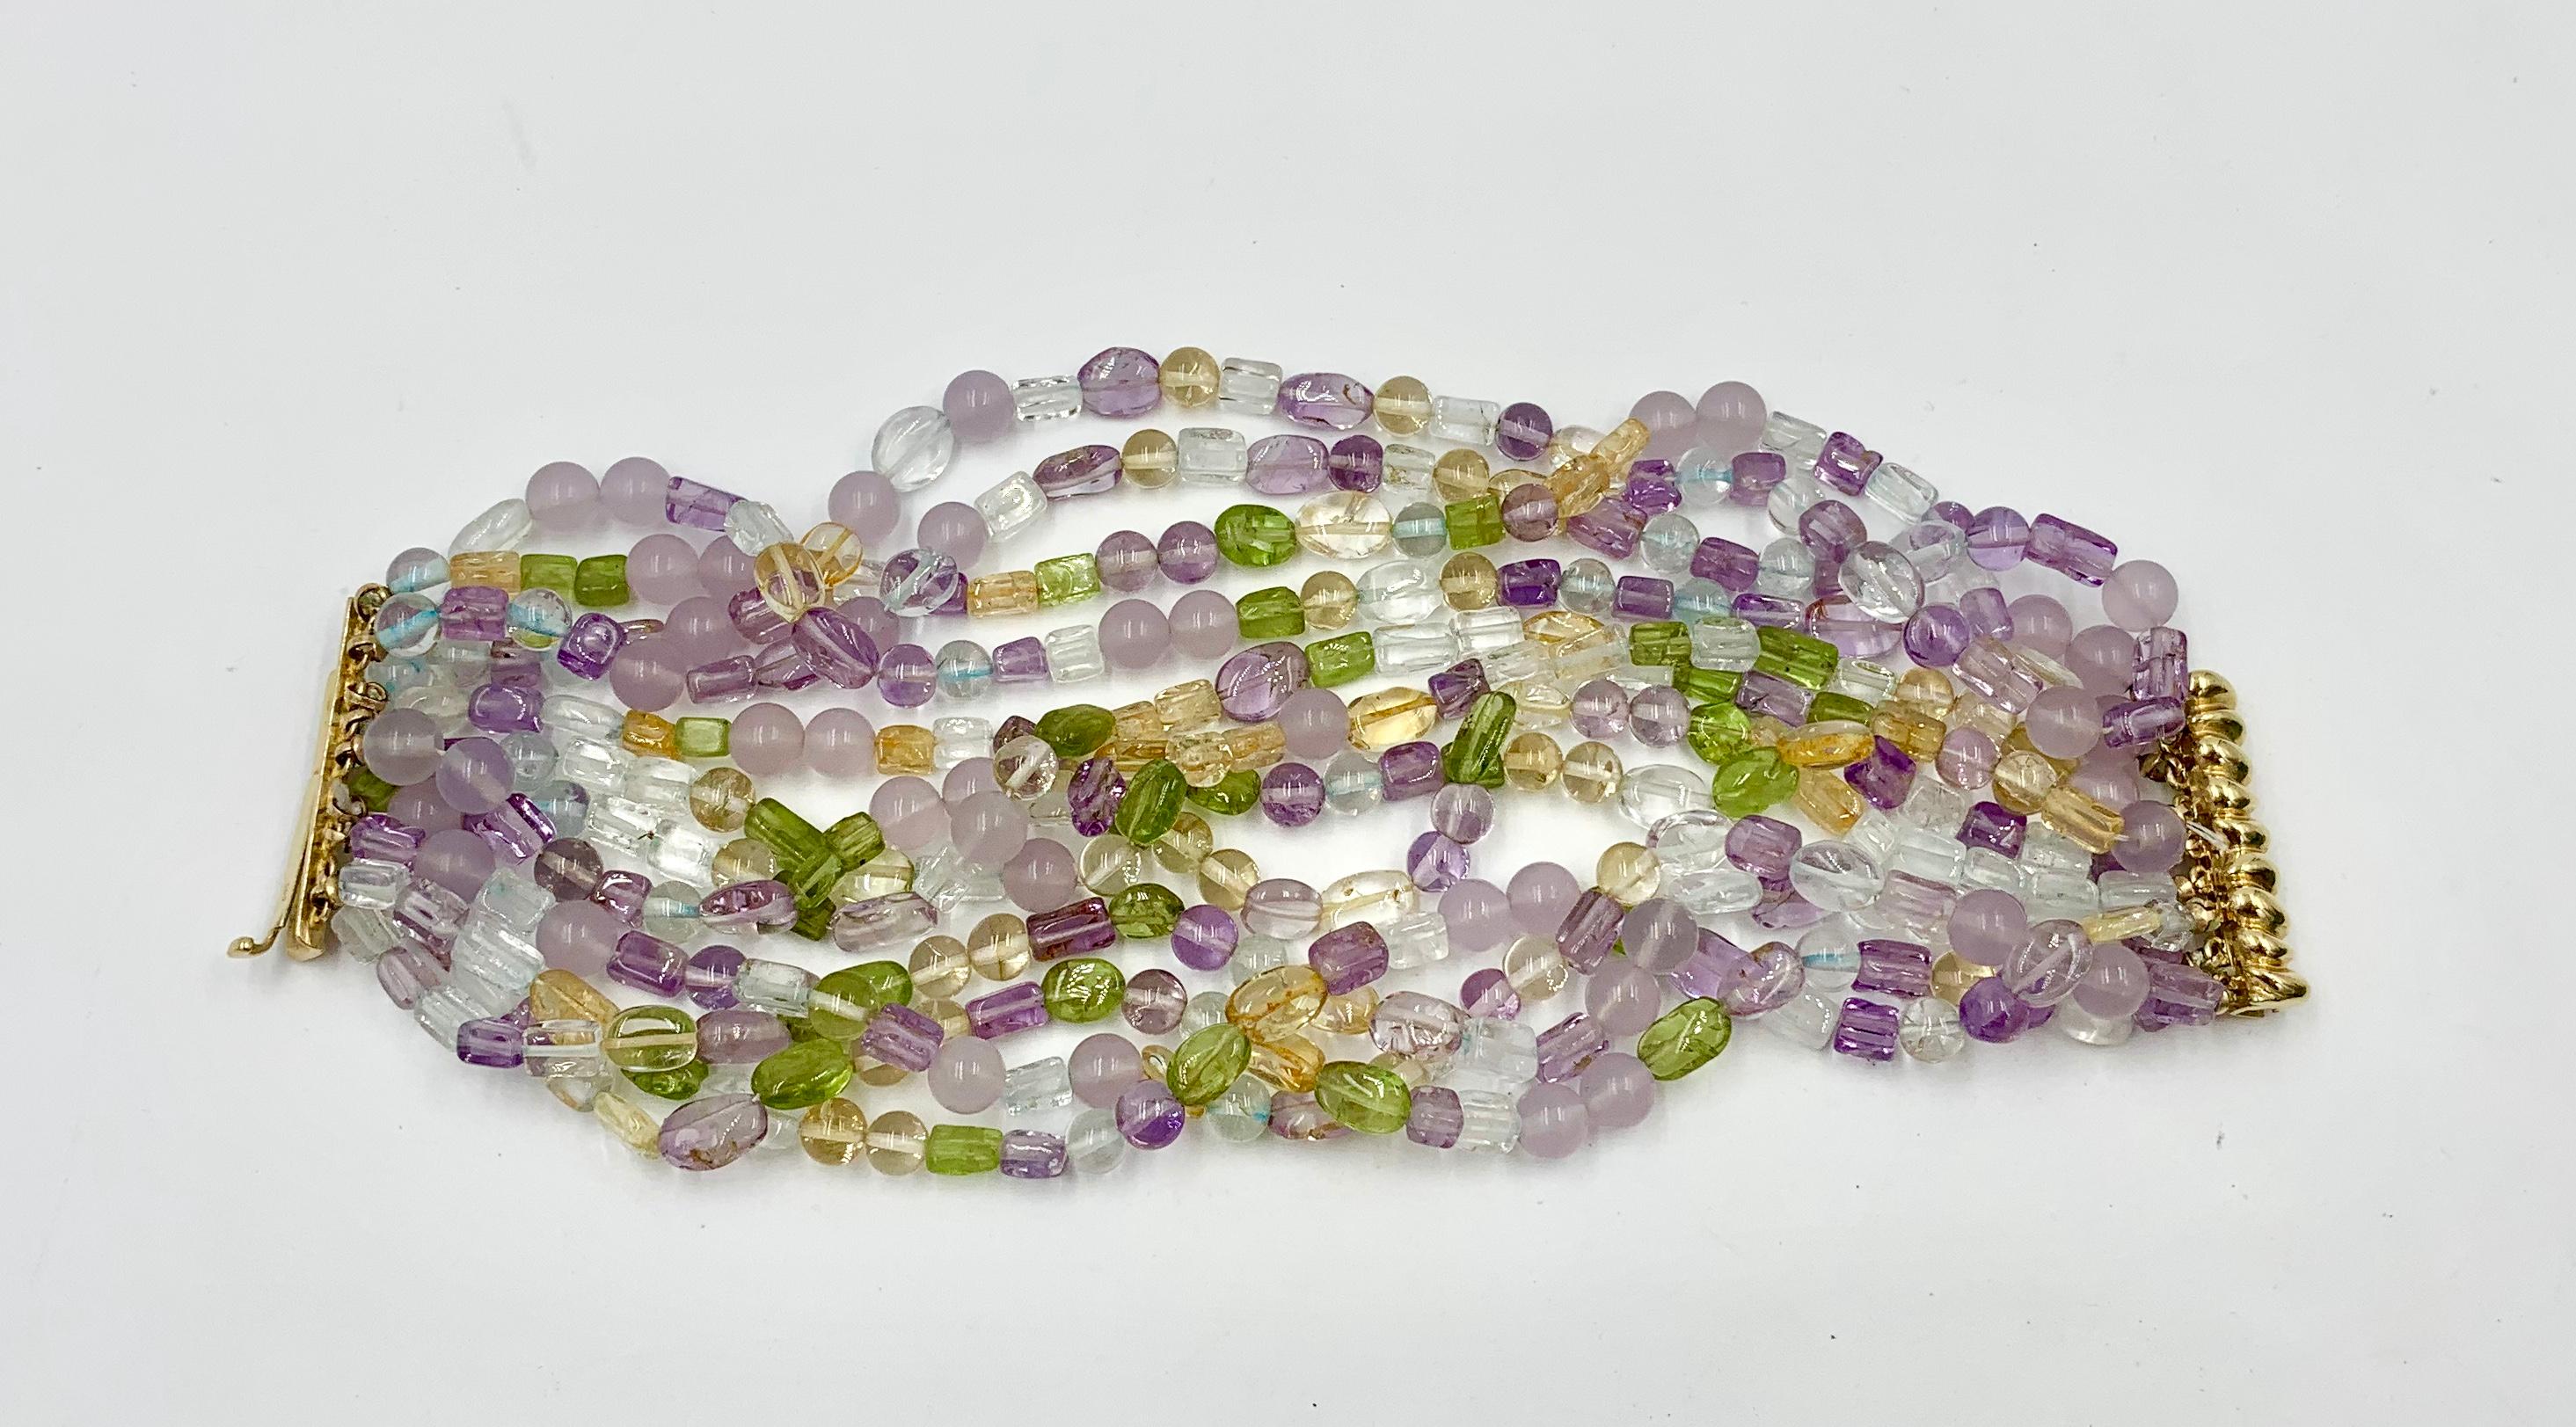 Indulge in a stunning Multistrand Multicolored Bead Torsade Bracelet with 12 strands of Amethyst, Peridot, Citrine & Aquamarine beads with a 14 Karat Gold clasp.  The stunning Multigem Bracelet is set with round, rectangular and oval Aquamarine,